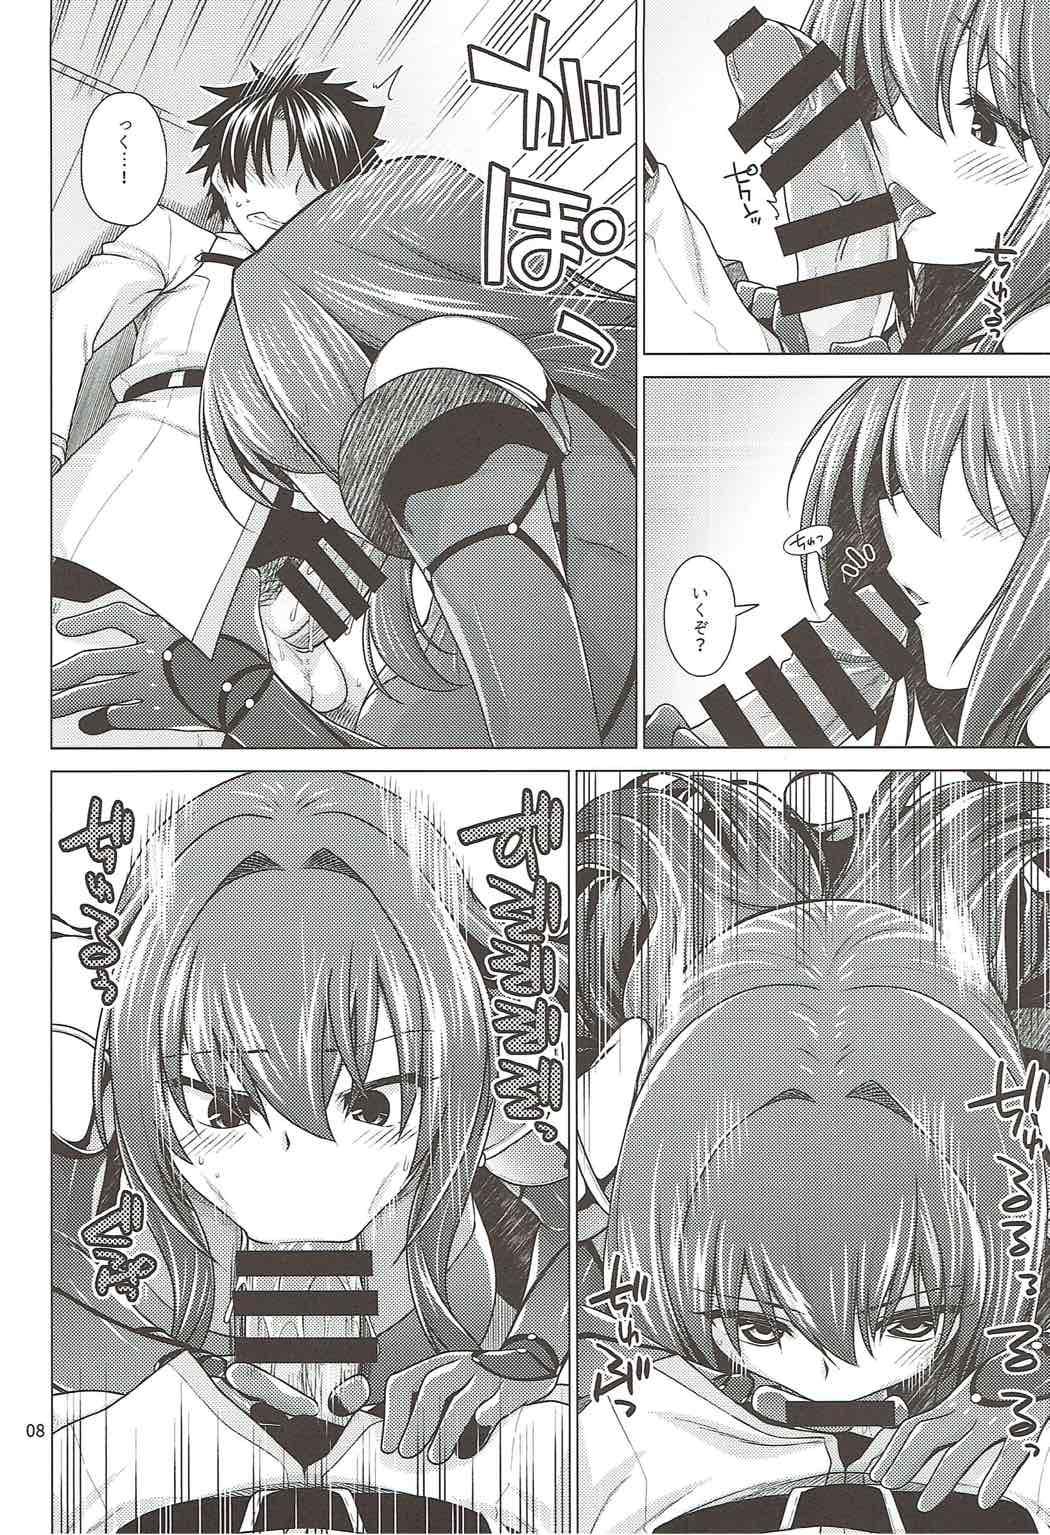 Whores Scathach Shishou to Celt Shiki Gachihamex! - Fate grand order Freaky - Page 7